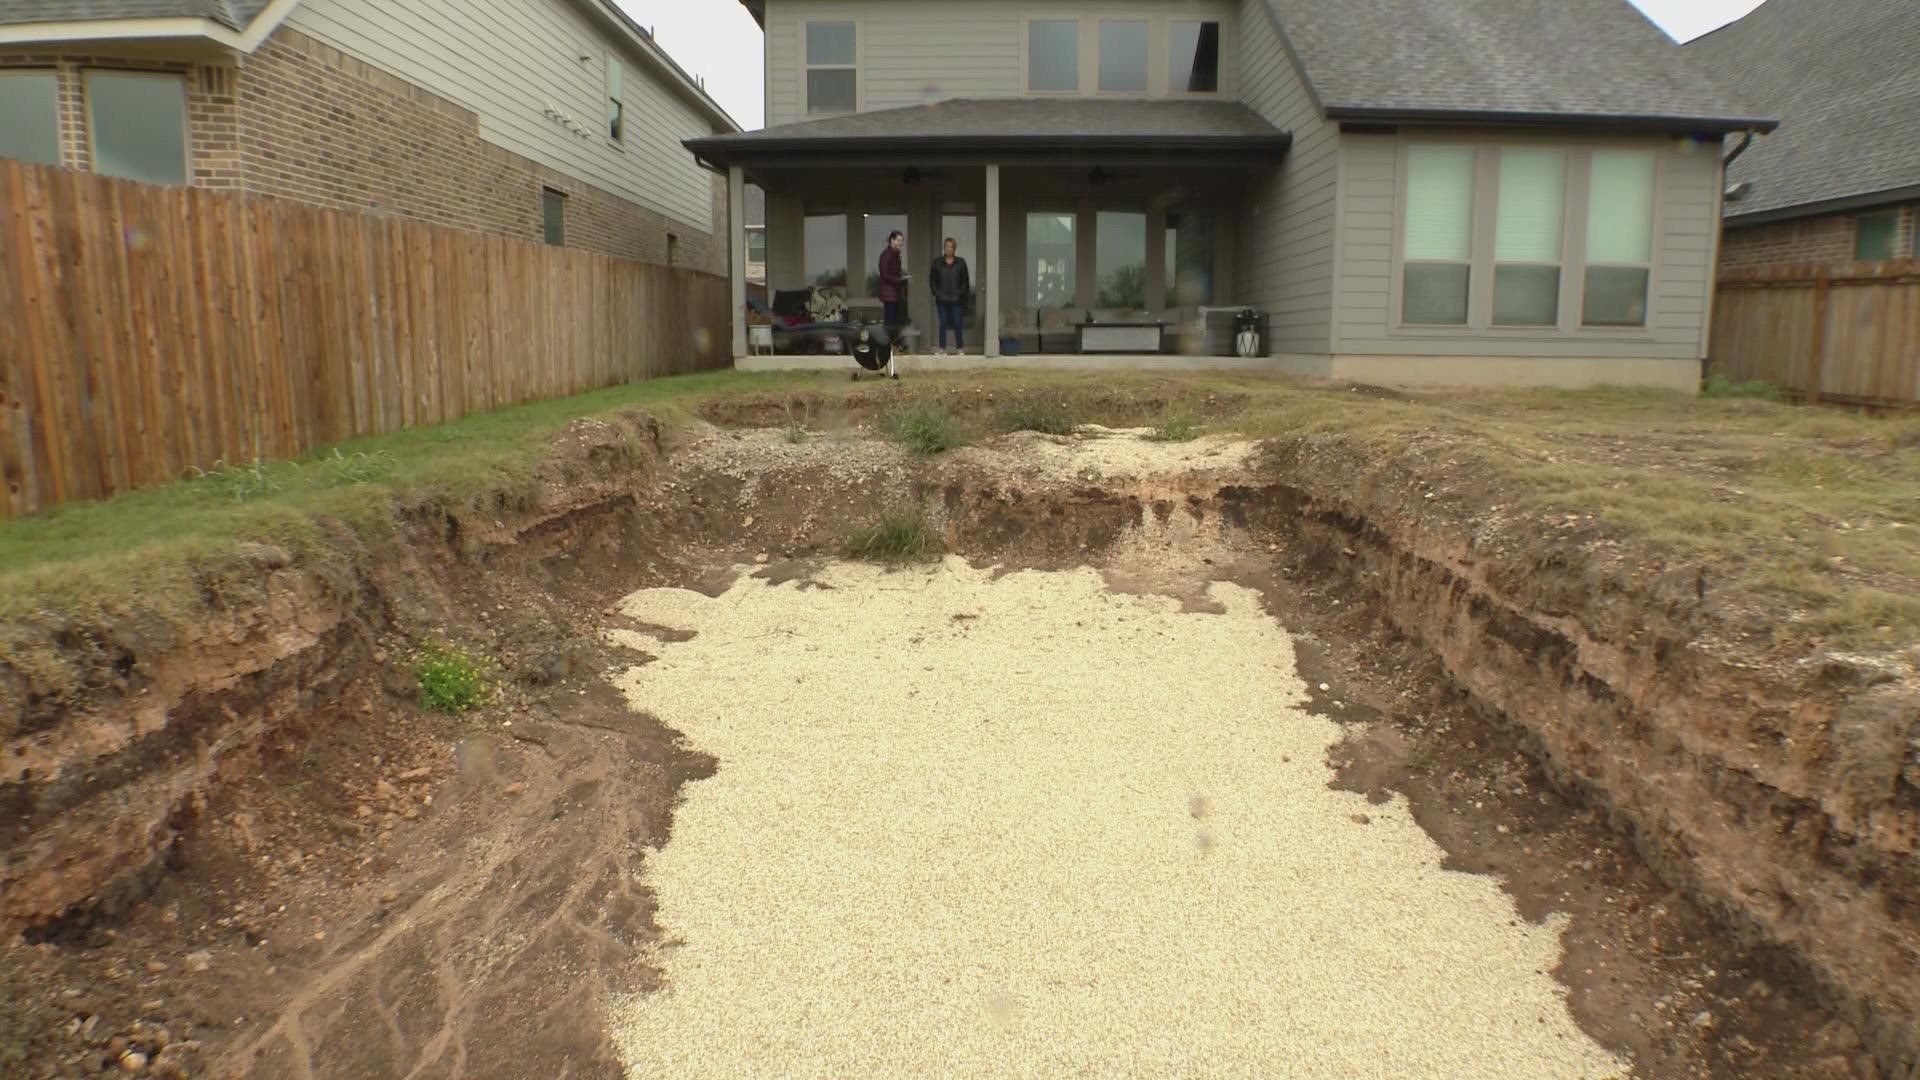 Three San Antonio families were hoping to make a splash earlier this summer with a new backyard pool are now sinking financially.